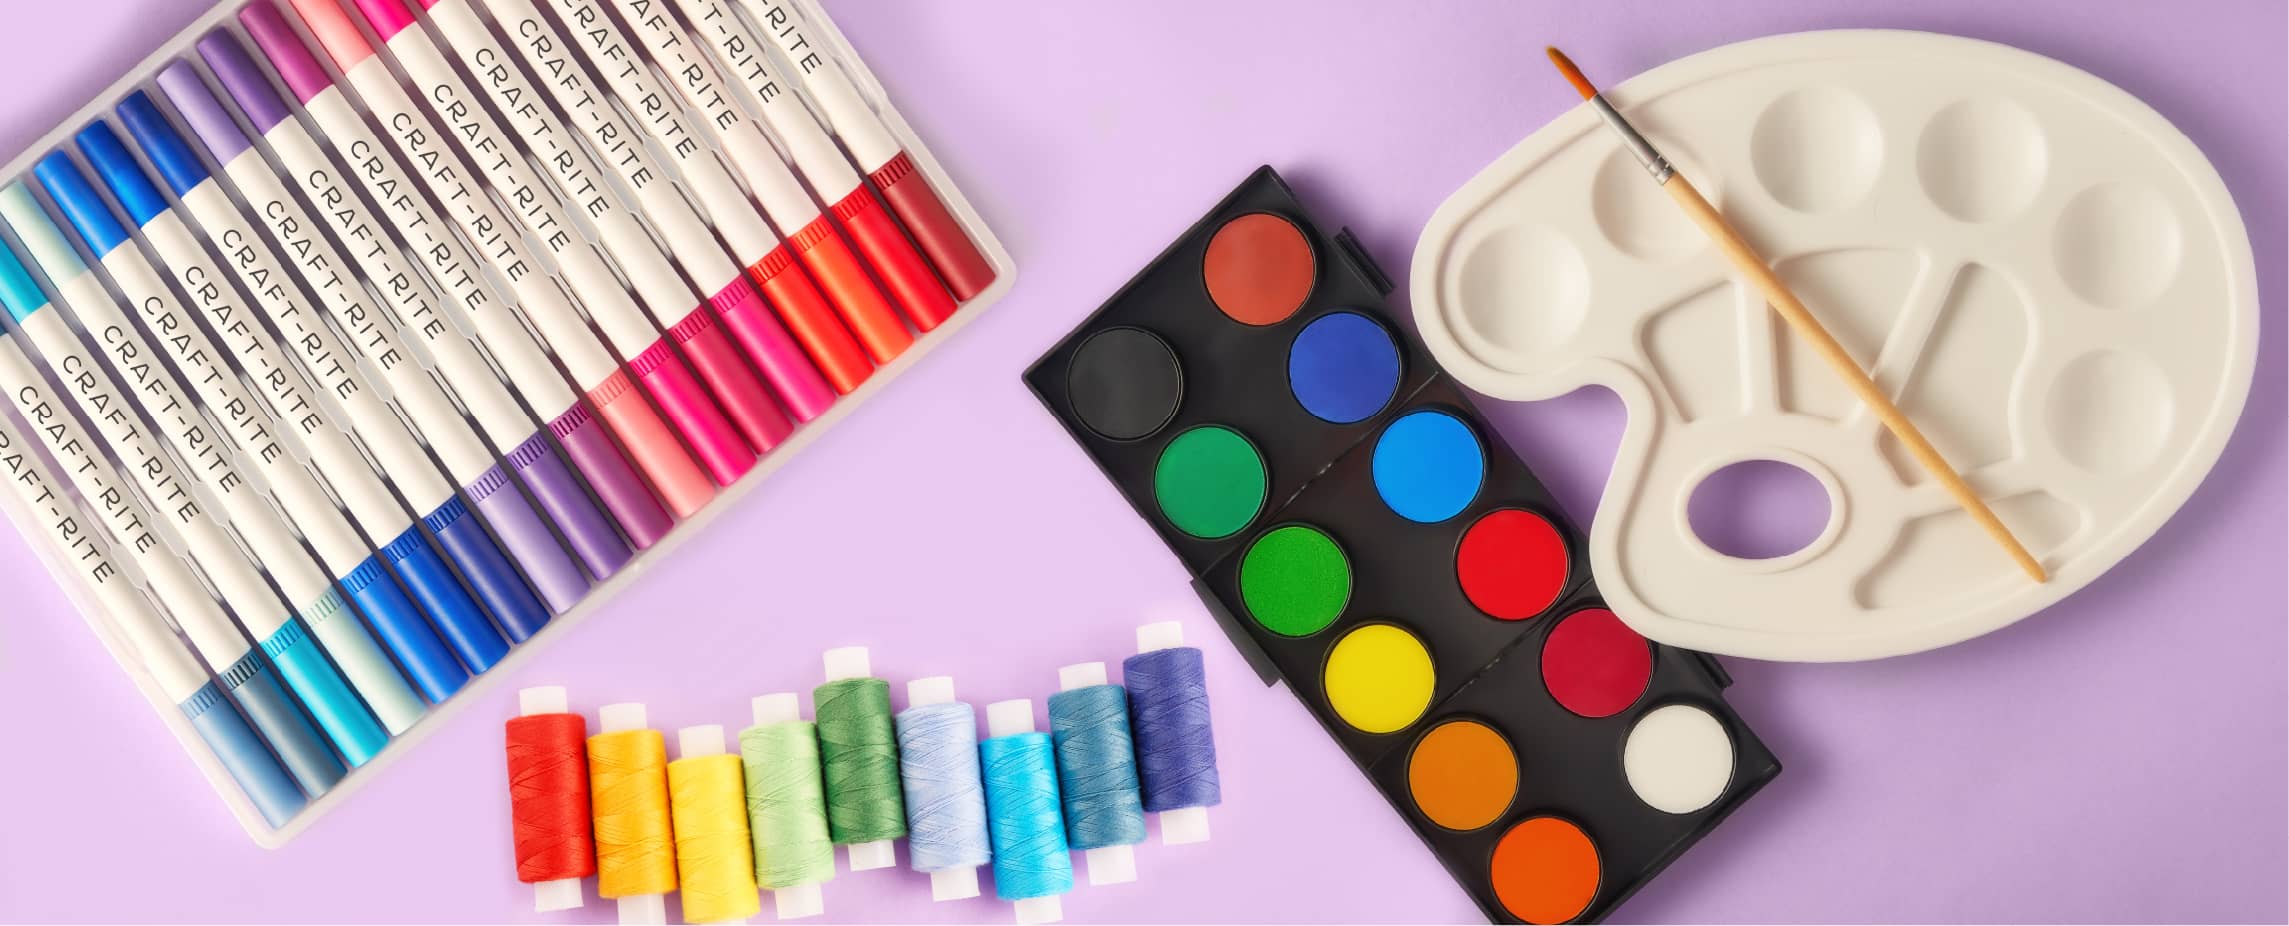 A marker set, colorful thread, paint, and paint palette with paint brush